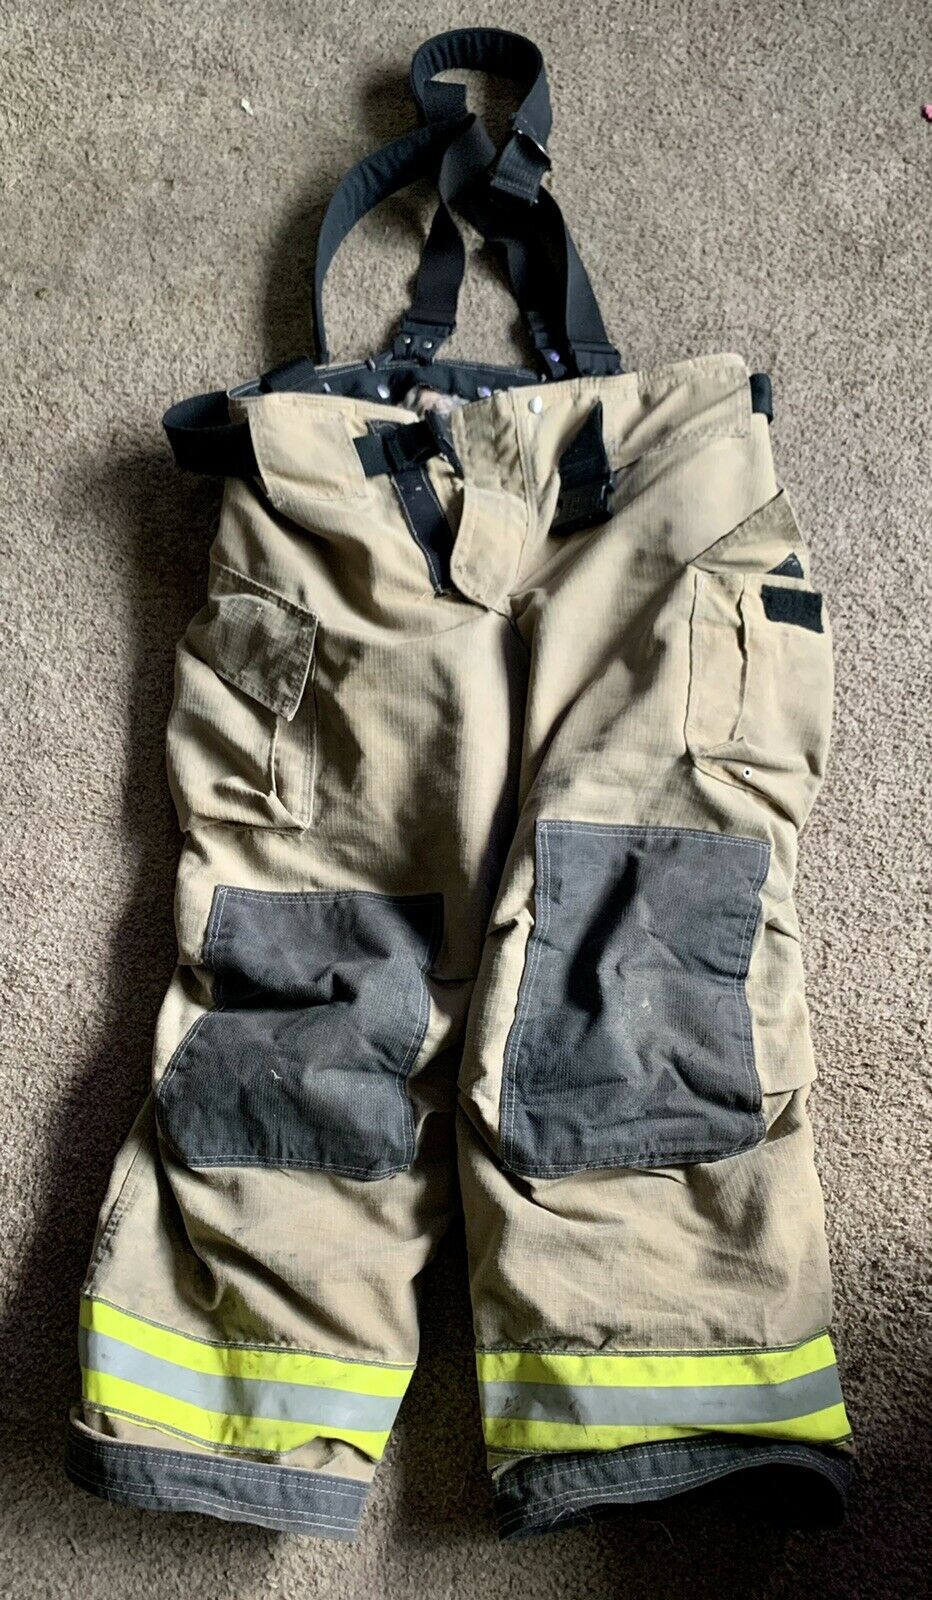 Cairns Reaxtion Turnout Bunker Pants 40 X 30 Used - Great Condition